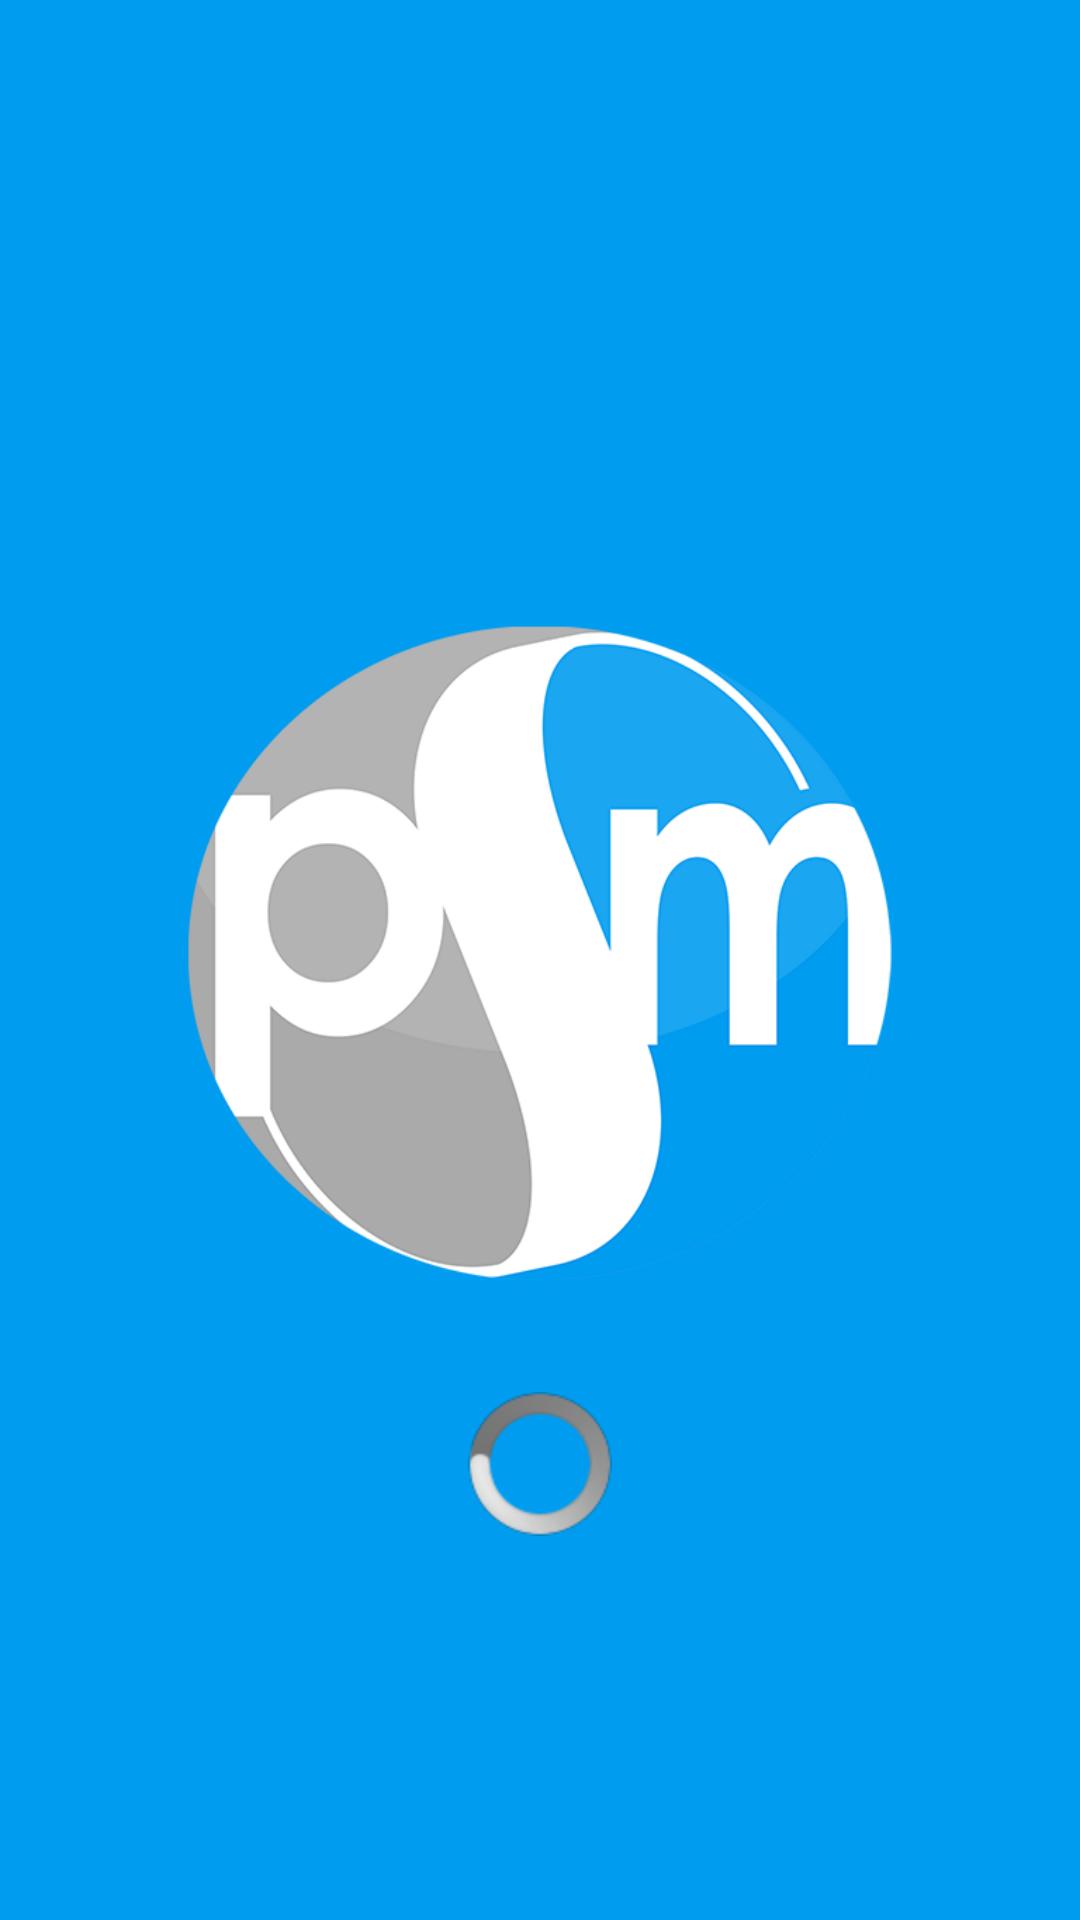 Psm : Psm I Certification Real Cases And Exam Questions Professional